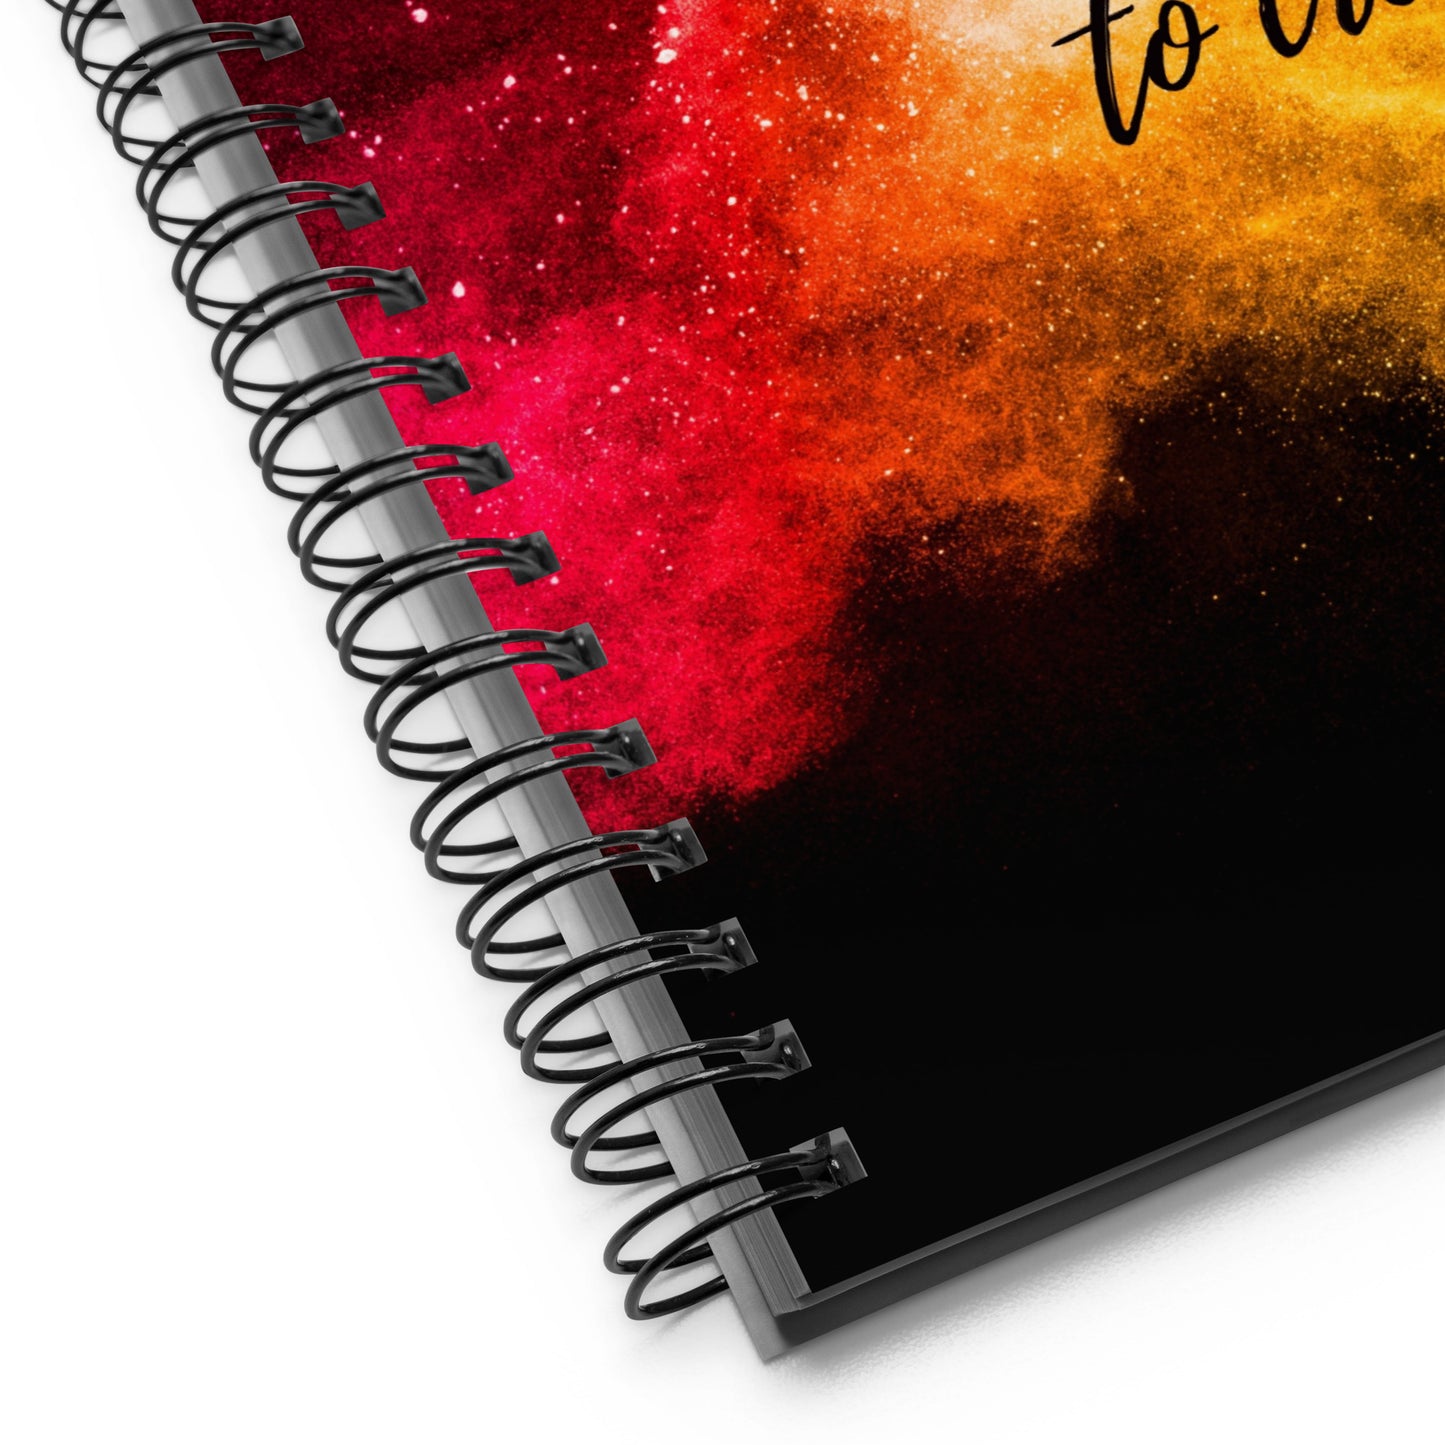 The Notebook to Create: "Never cease to create!"